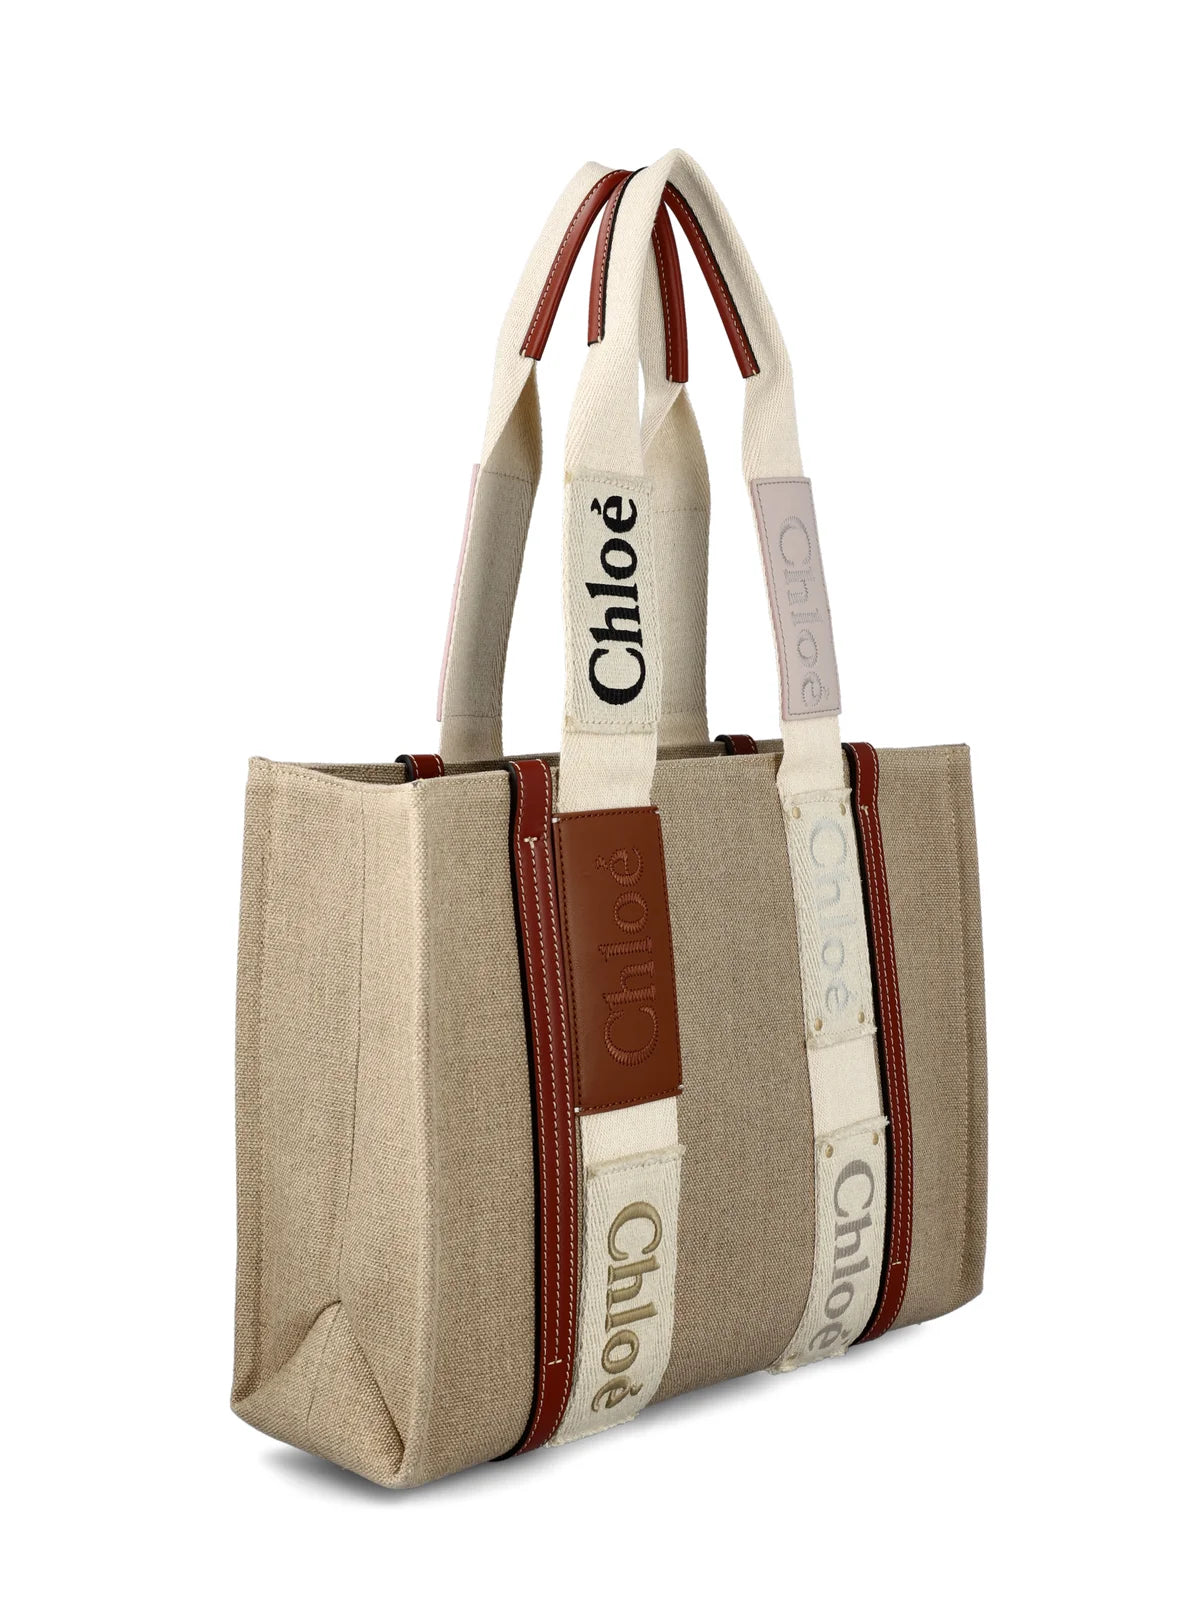 Chloe Woody Medium Tote in Brown/Beige available at TNT The New Trend Australia.